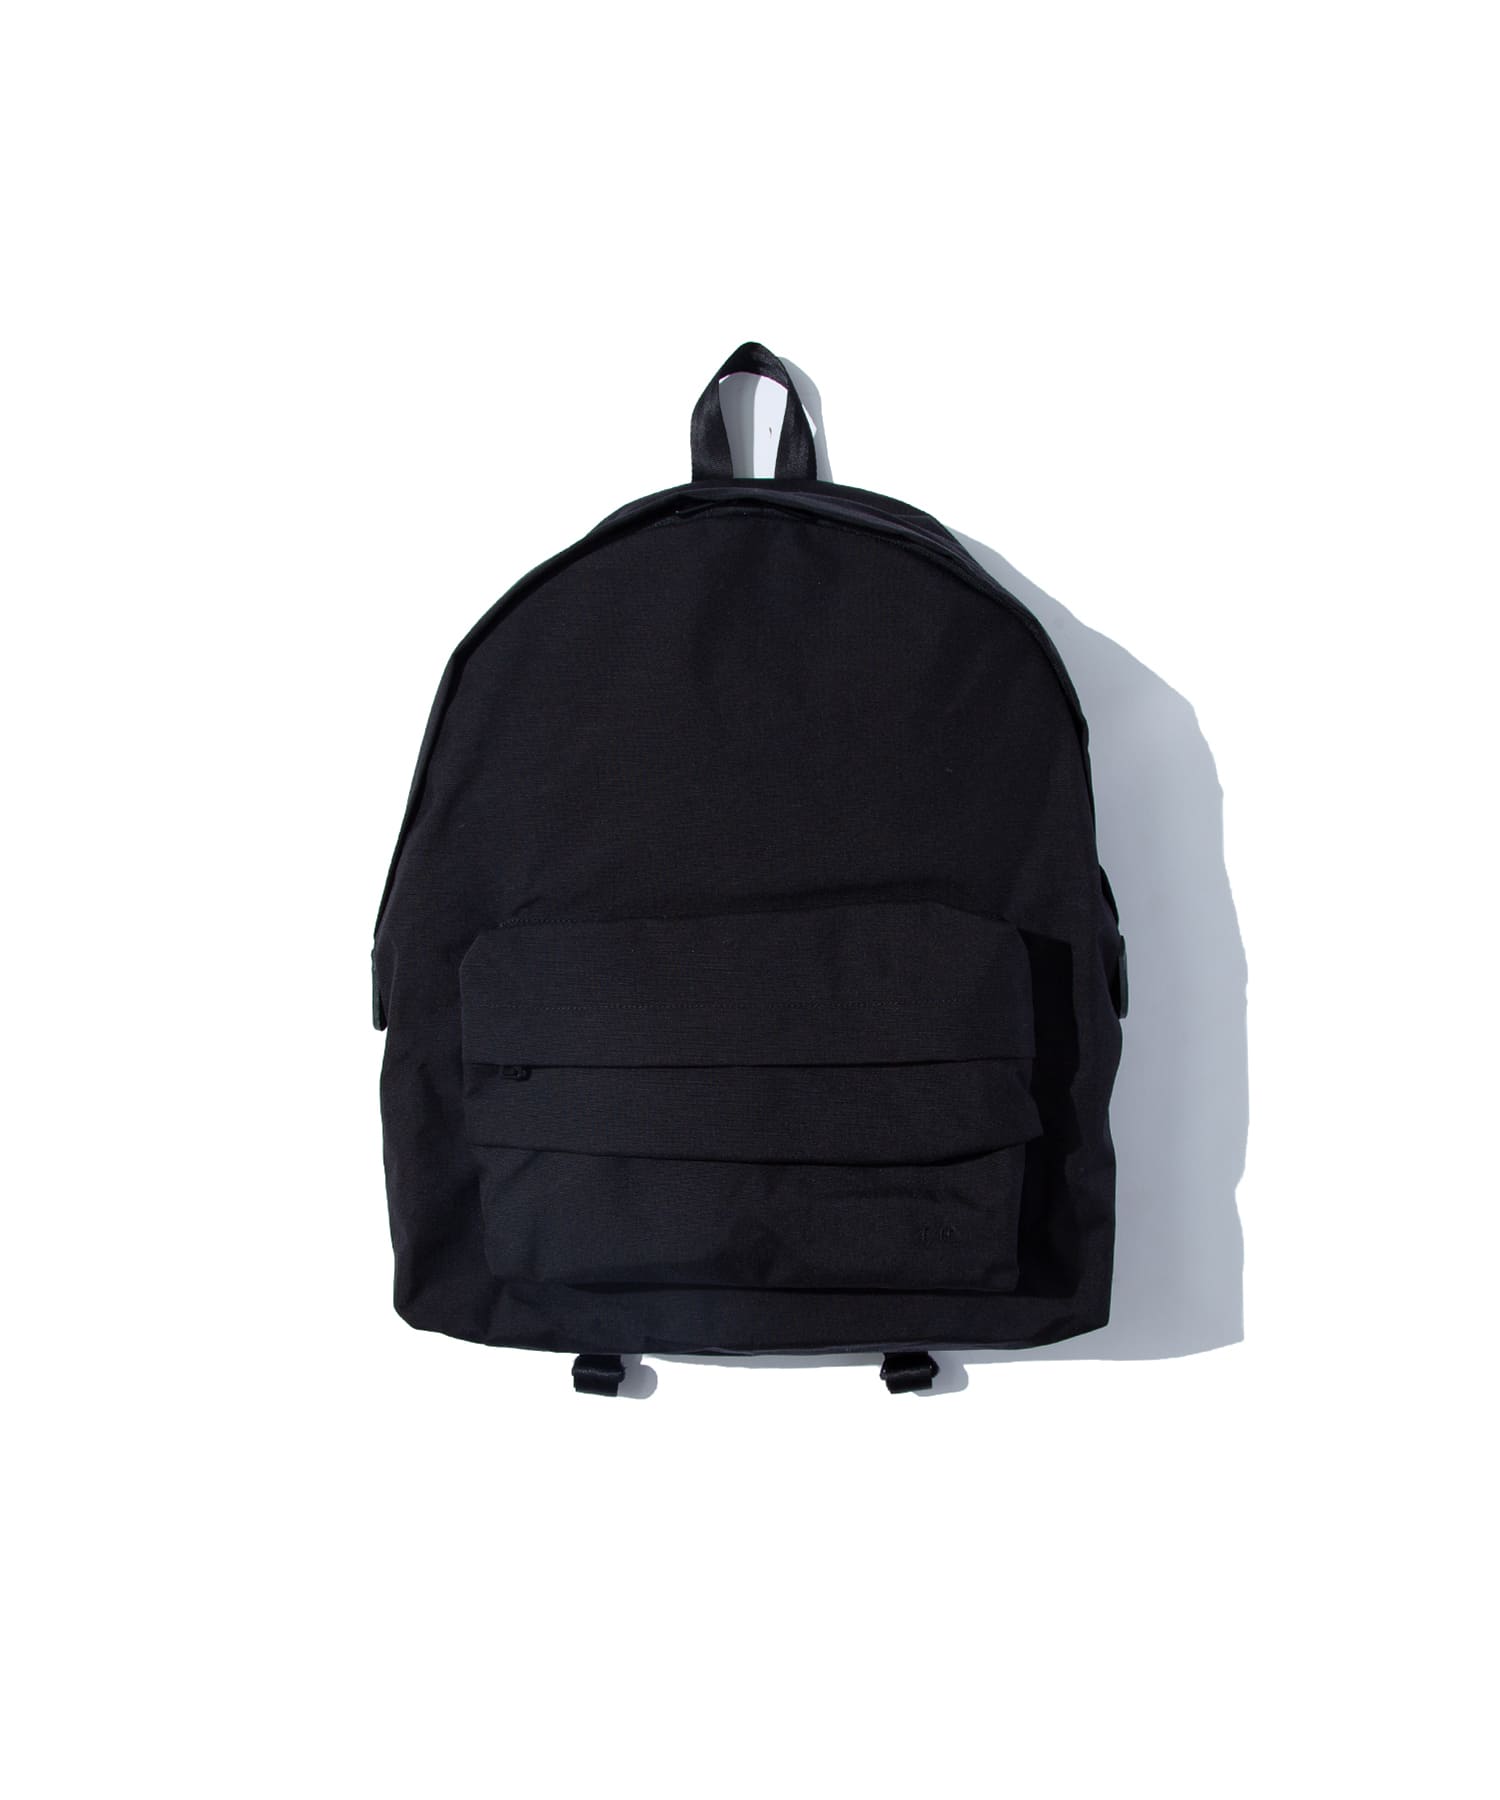 F/CE. / CORDURA FIRE RESISTANT DAY PACK